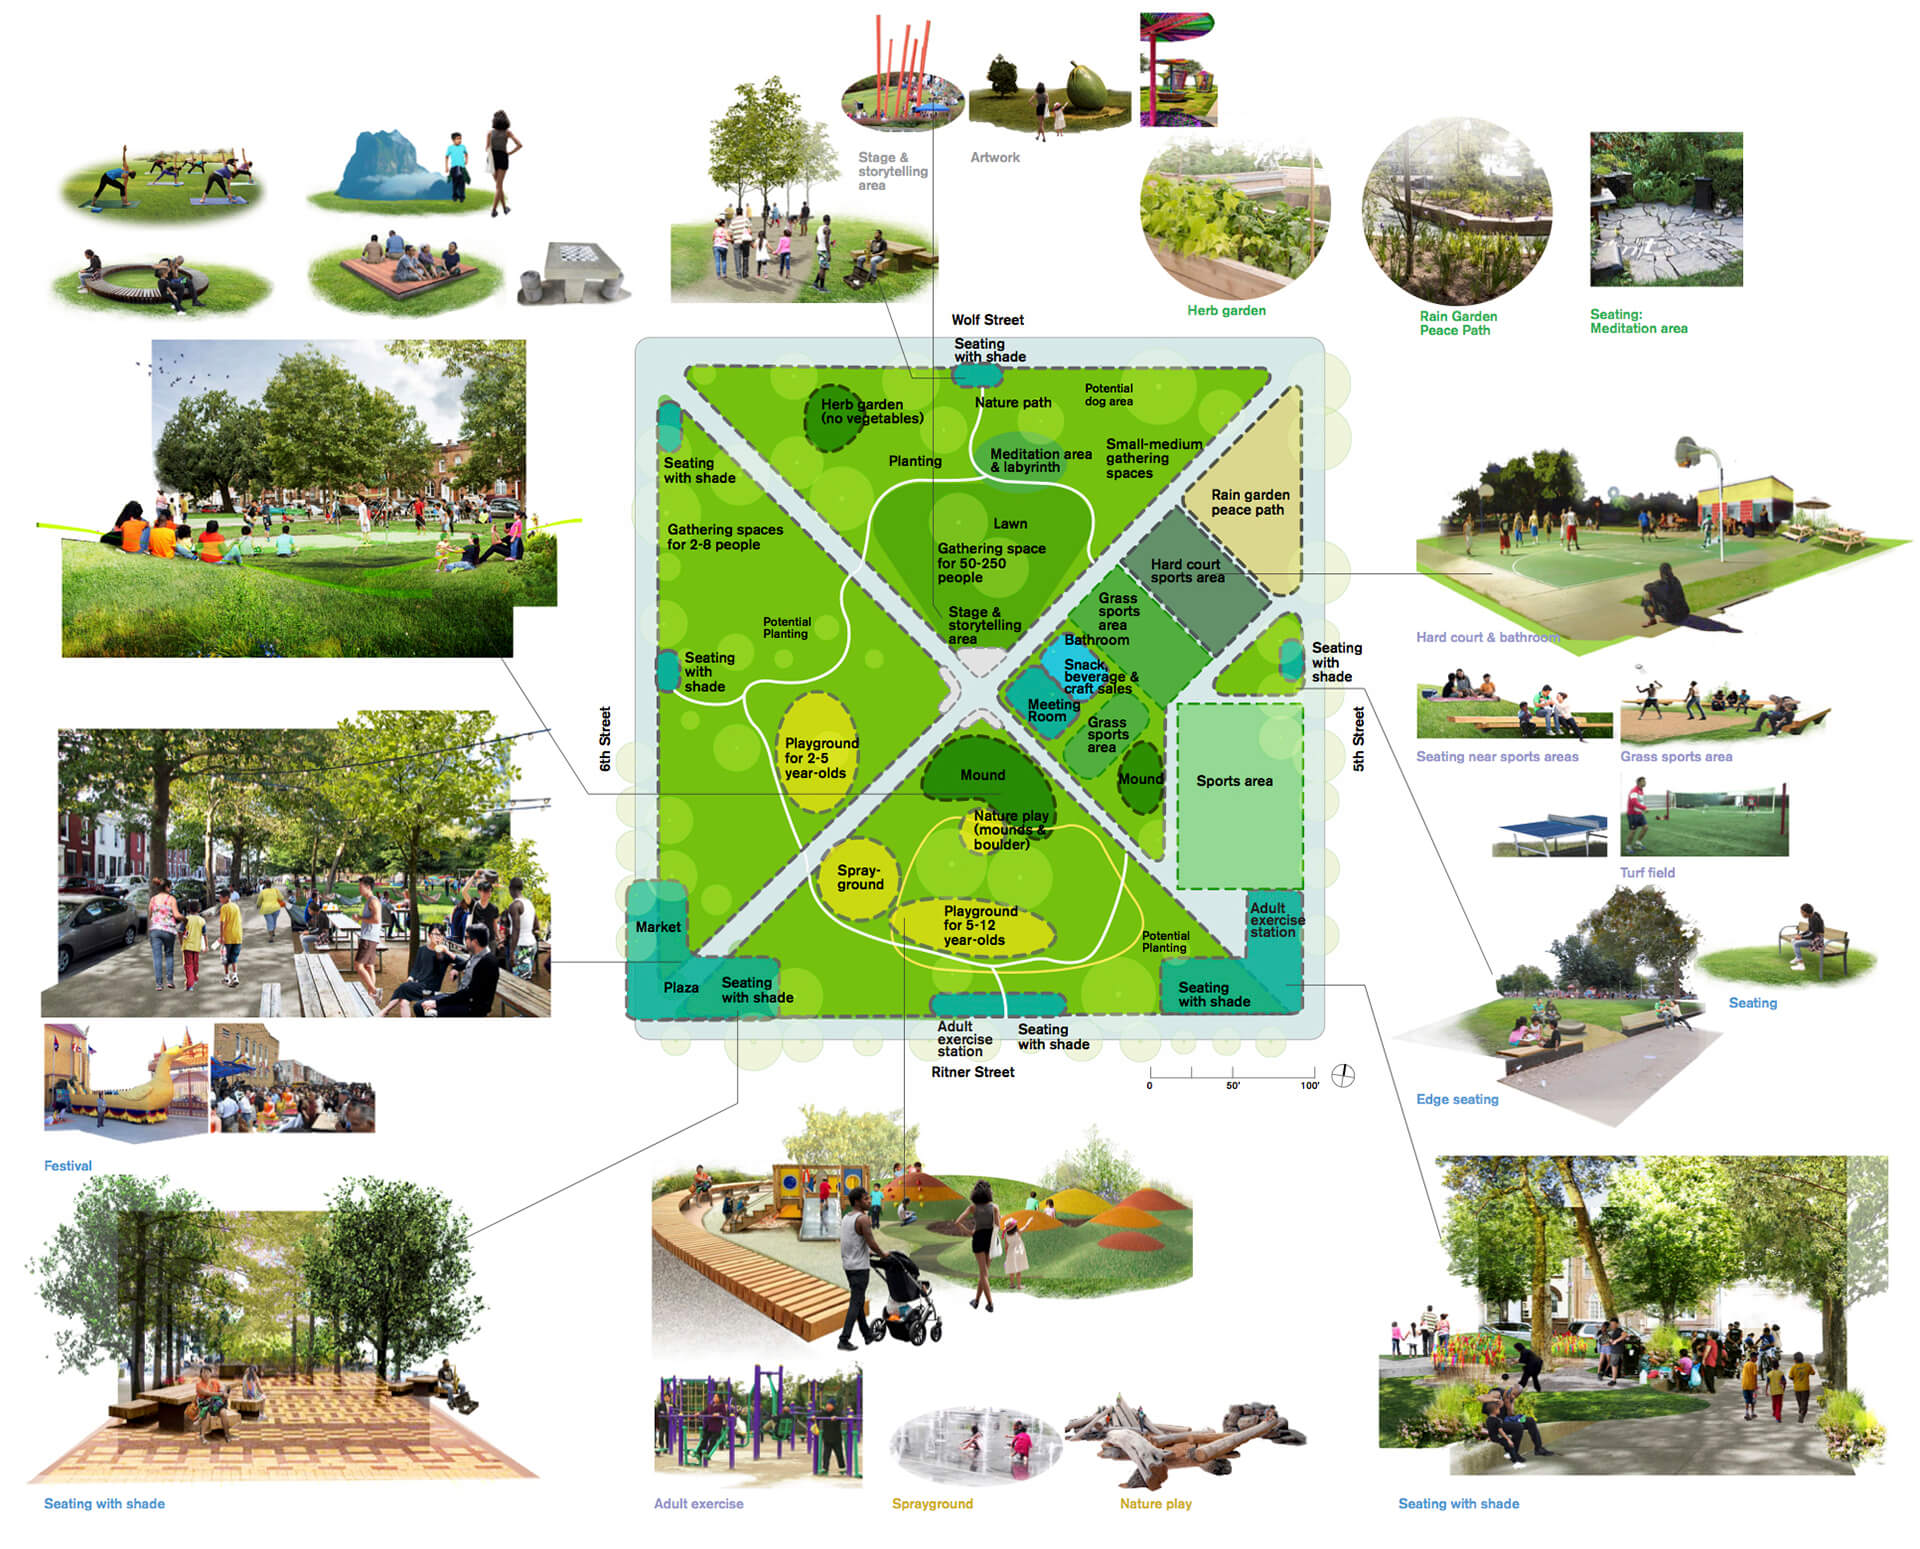 Model and drawings from Hector’s landscape design and neighborhood plan for Philadelphia’s Mifflin Square Park in collaboration with the Mifflin Coalition: SEAMAAC, Cambodian Association of Greater Philadelphia, Bhutanese American Organization— Philadelphia, United Communities, Friends of Mifflin Square Park, and Mural Arts Philadephia Restored Spaces (2016–present)